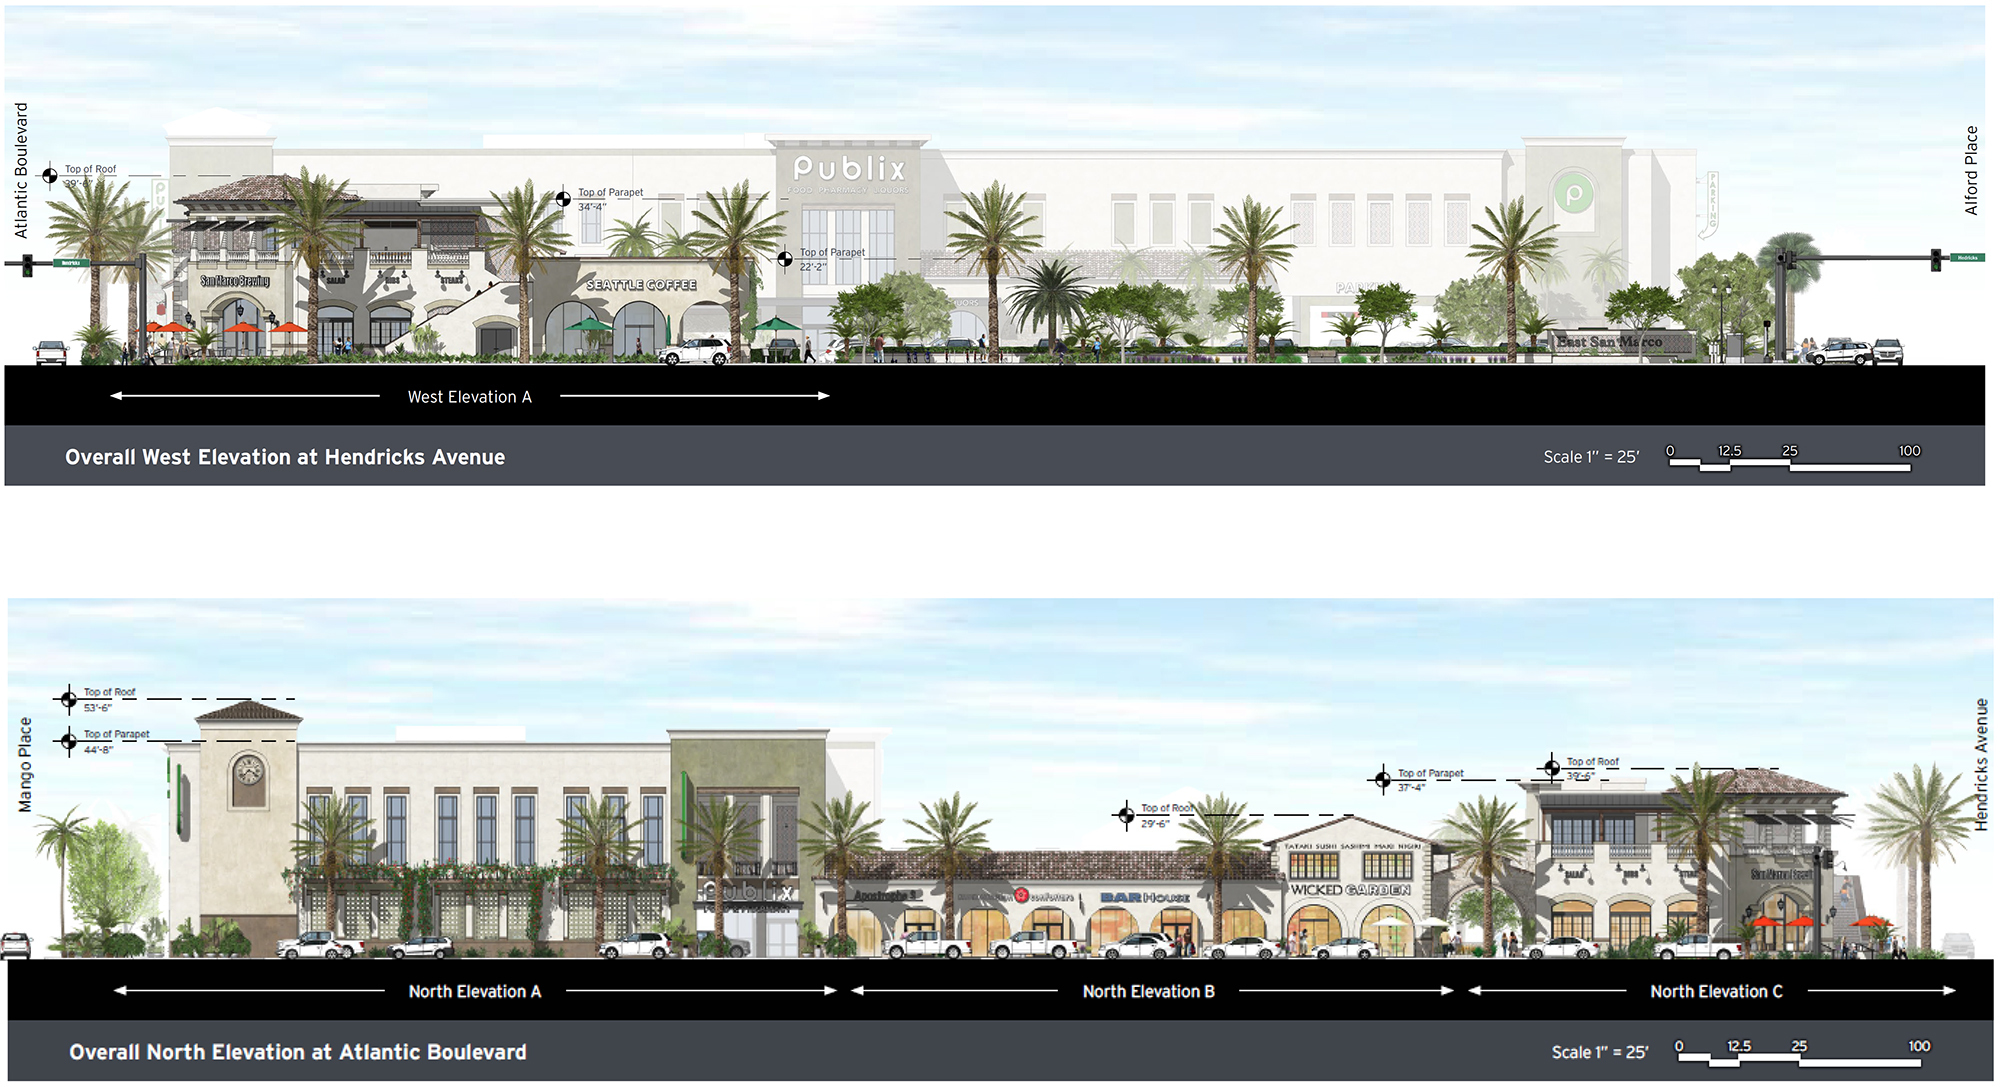 An elevation of the Publix shopping center.